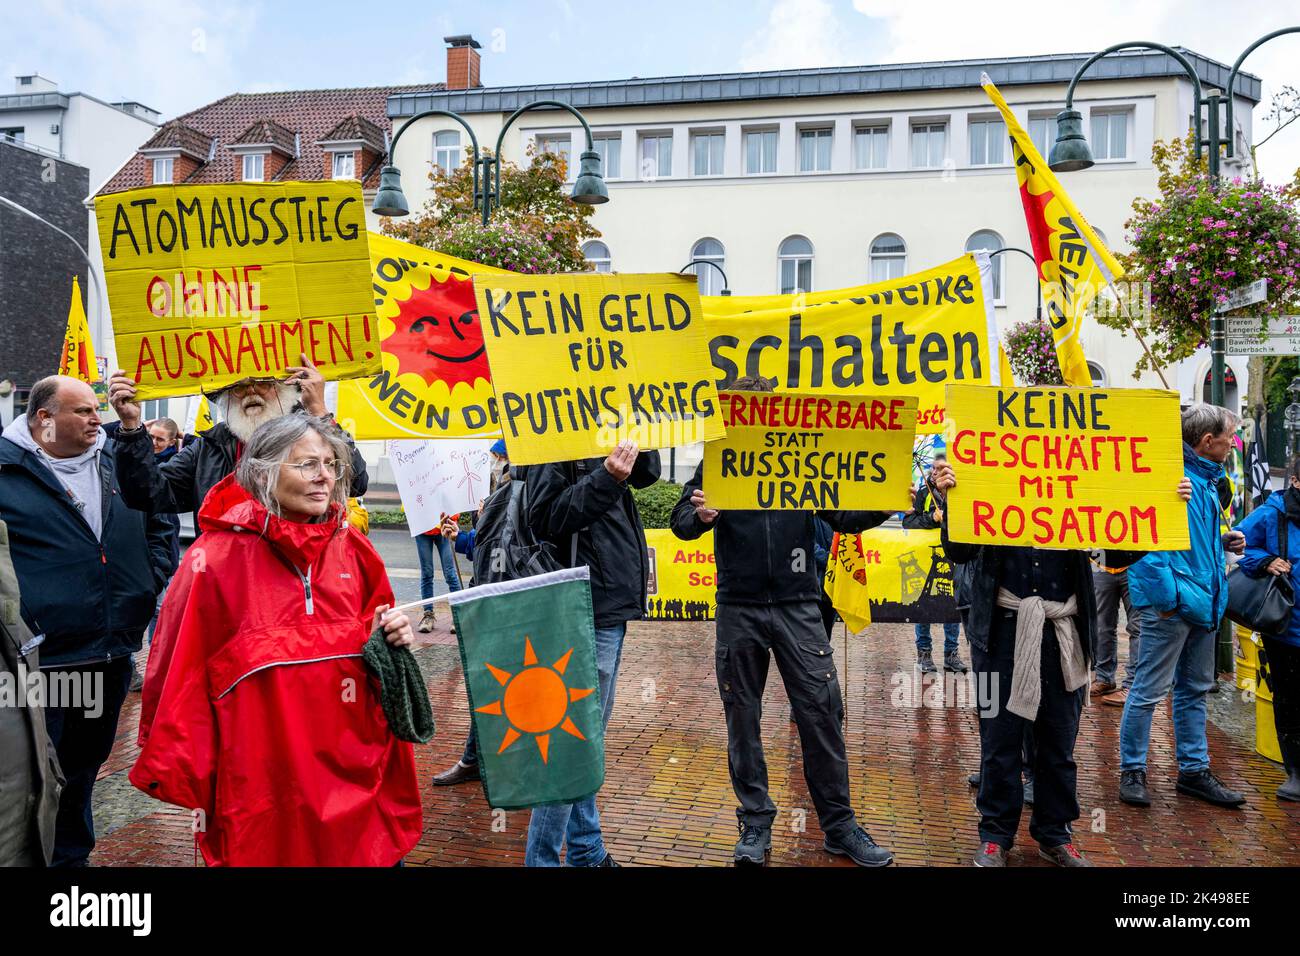 01 October 2022, Lower Saxony, Lingen: Opponents of nuclear power hold up signs at the train station with inscriptions such as 'Nuclear phase-out without exceptions!', 'Nuclear power no thanks!', 'No money for Putin's war', 'Renewables instead of Russian gas' and 'No business with Rosatom'. The aim of the demonstration is an end to the uranium deals with Russia as well as a complete nuclear phase-out without lifetime extensions and decommissioning of the fuel element production in Lingen as well as the uranium enrichment in Gronau in Westphalia and in Almelo in the Netherlands. Photo: David In Stock Photo